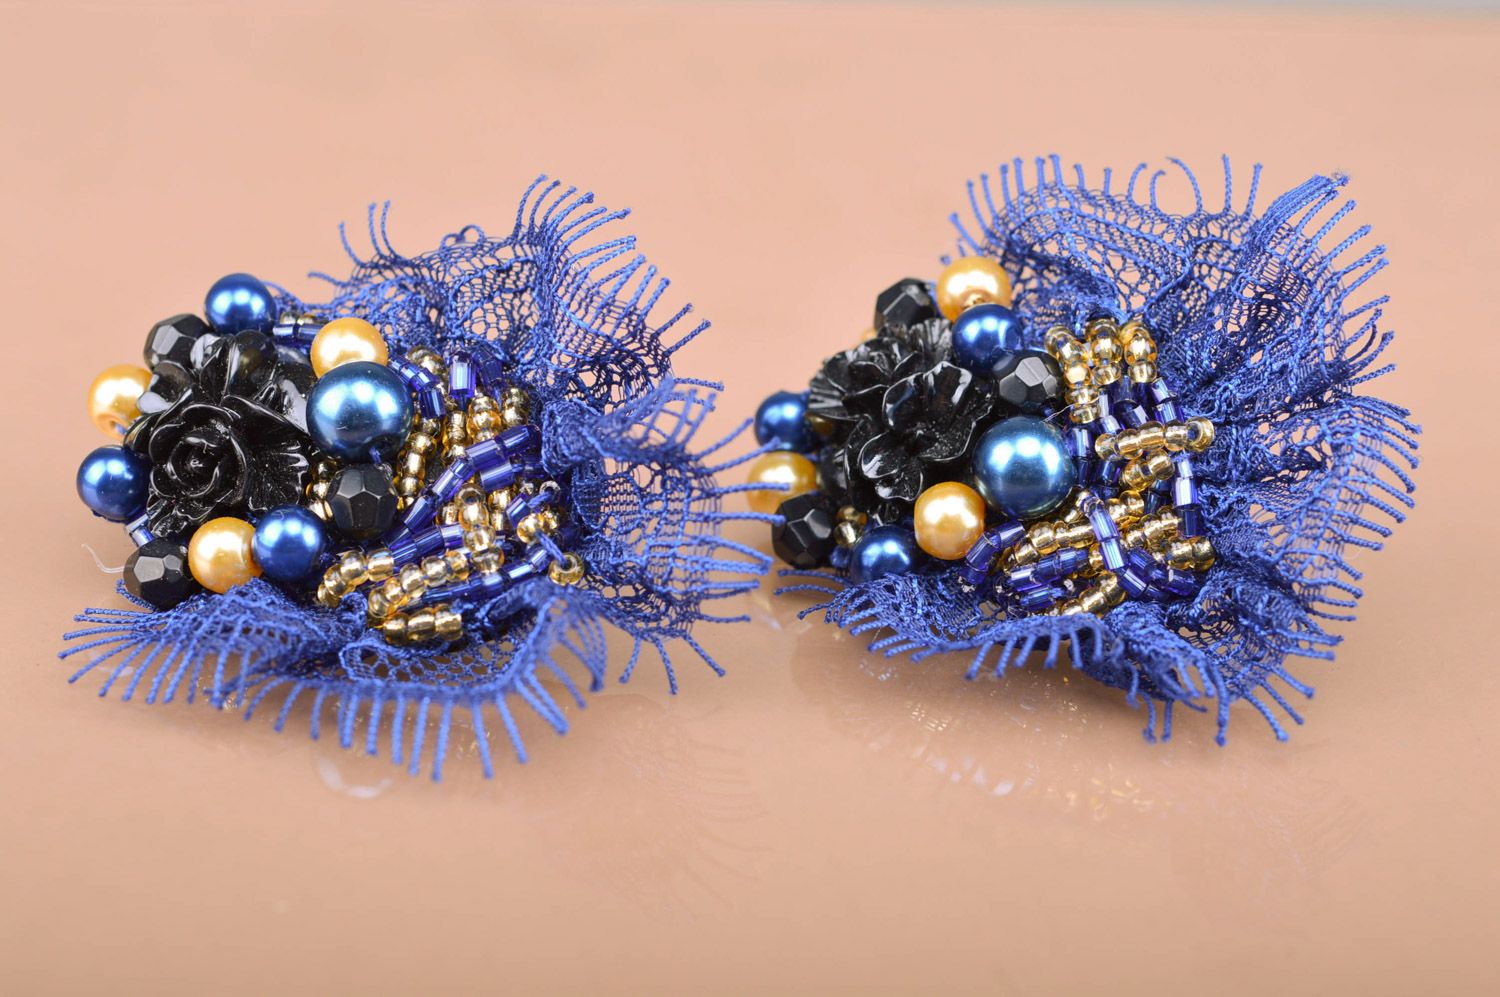 Handmade massive beaded stud earrings with lace in black and dark blue colors photo 1